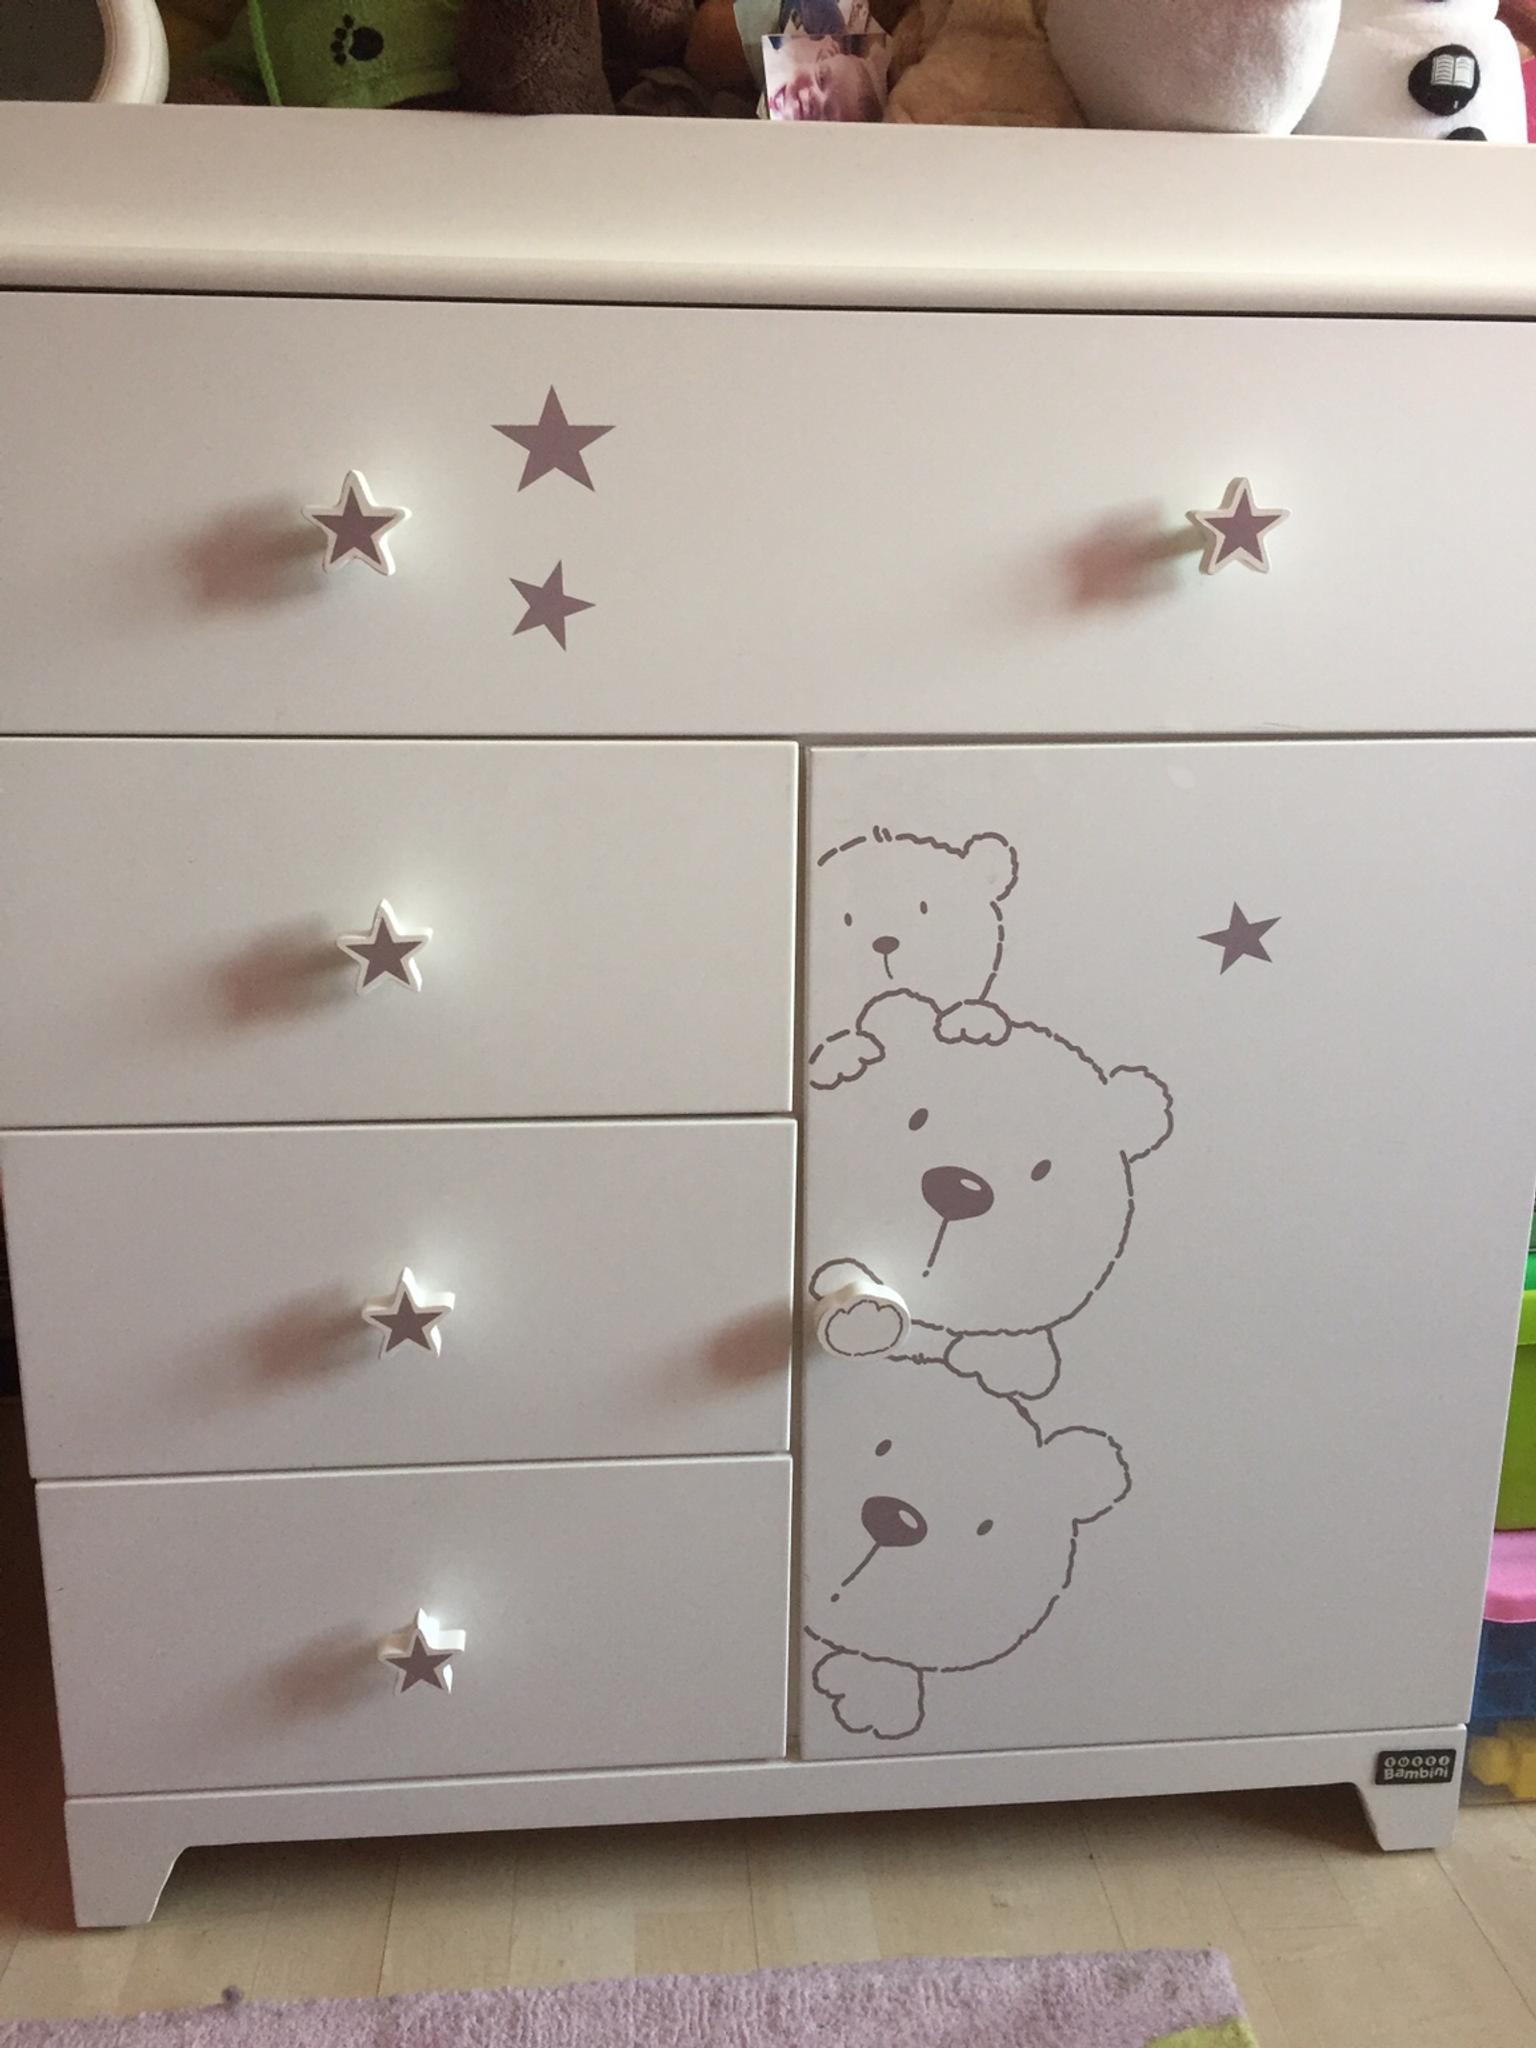 baby changing cupboard